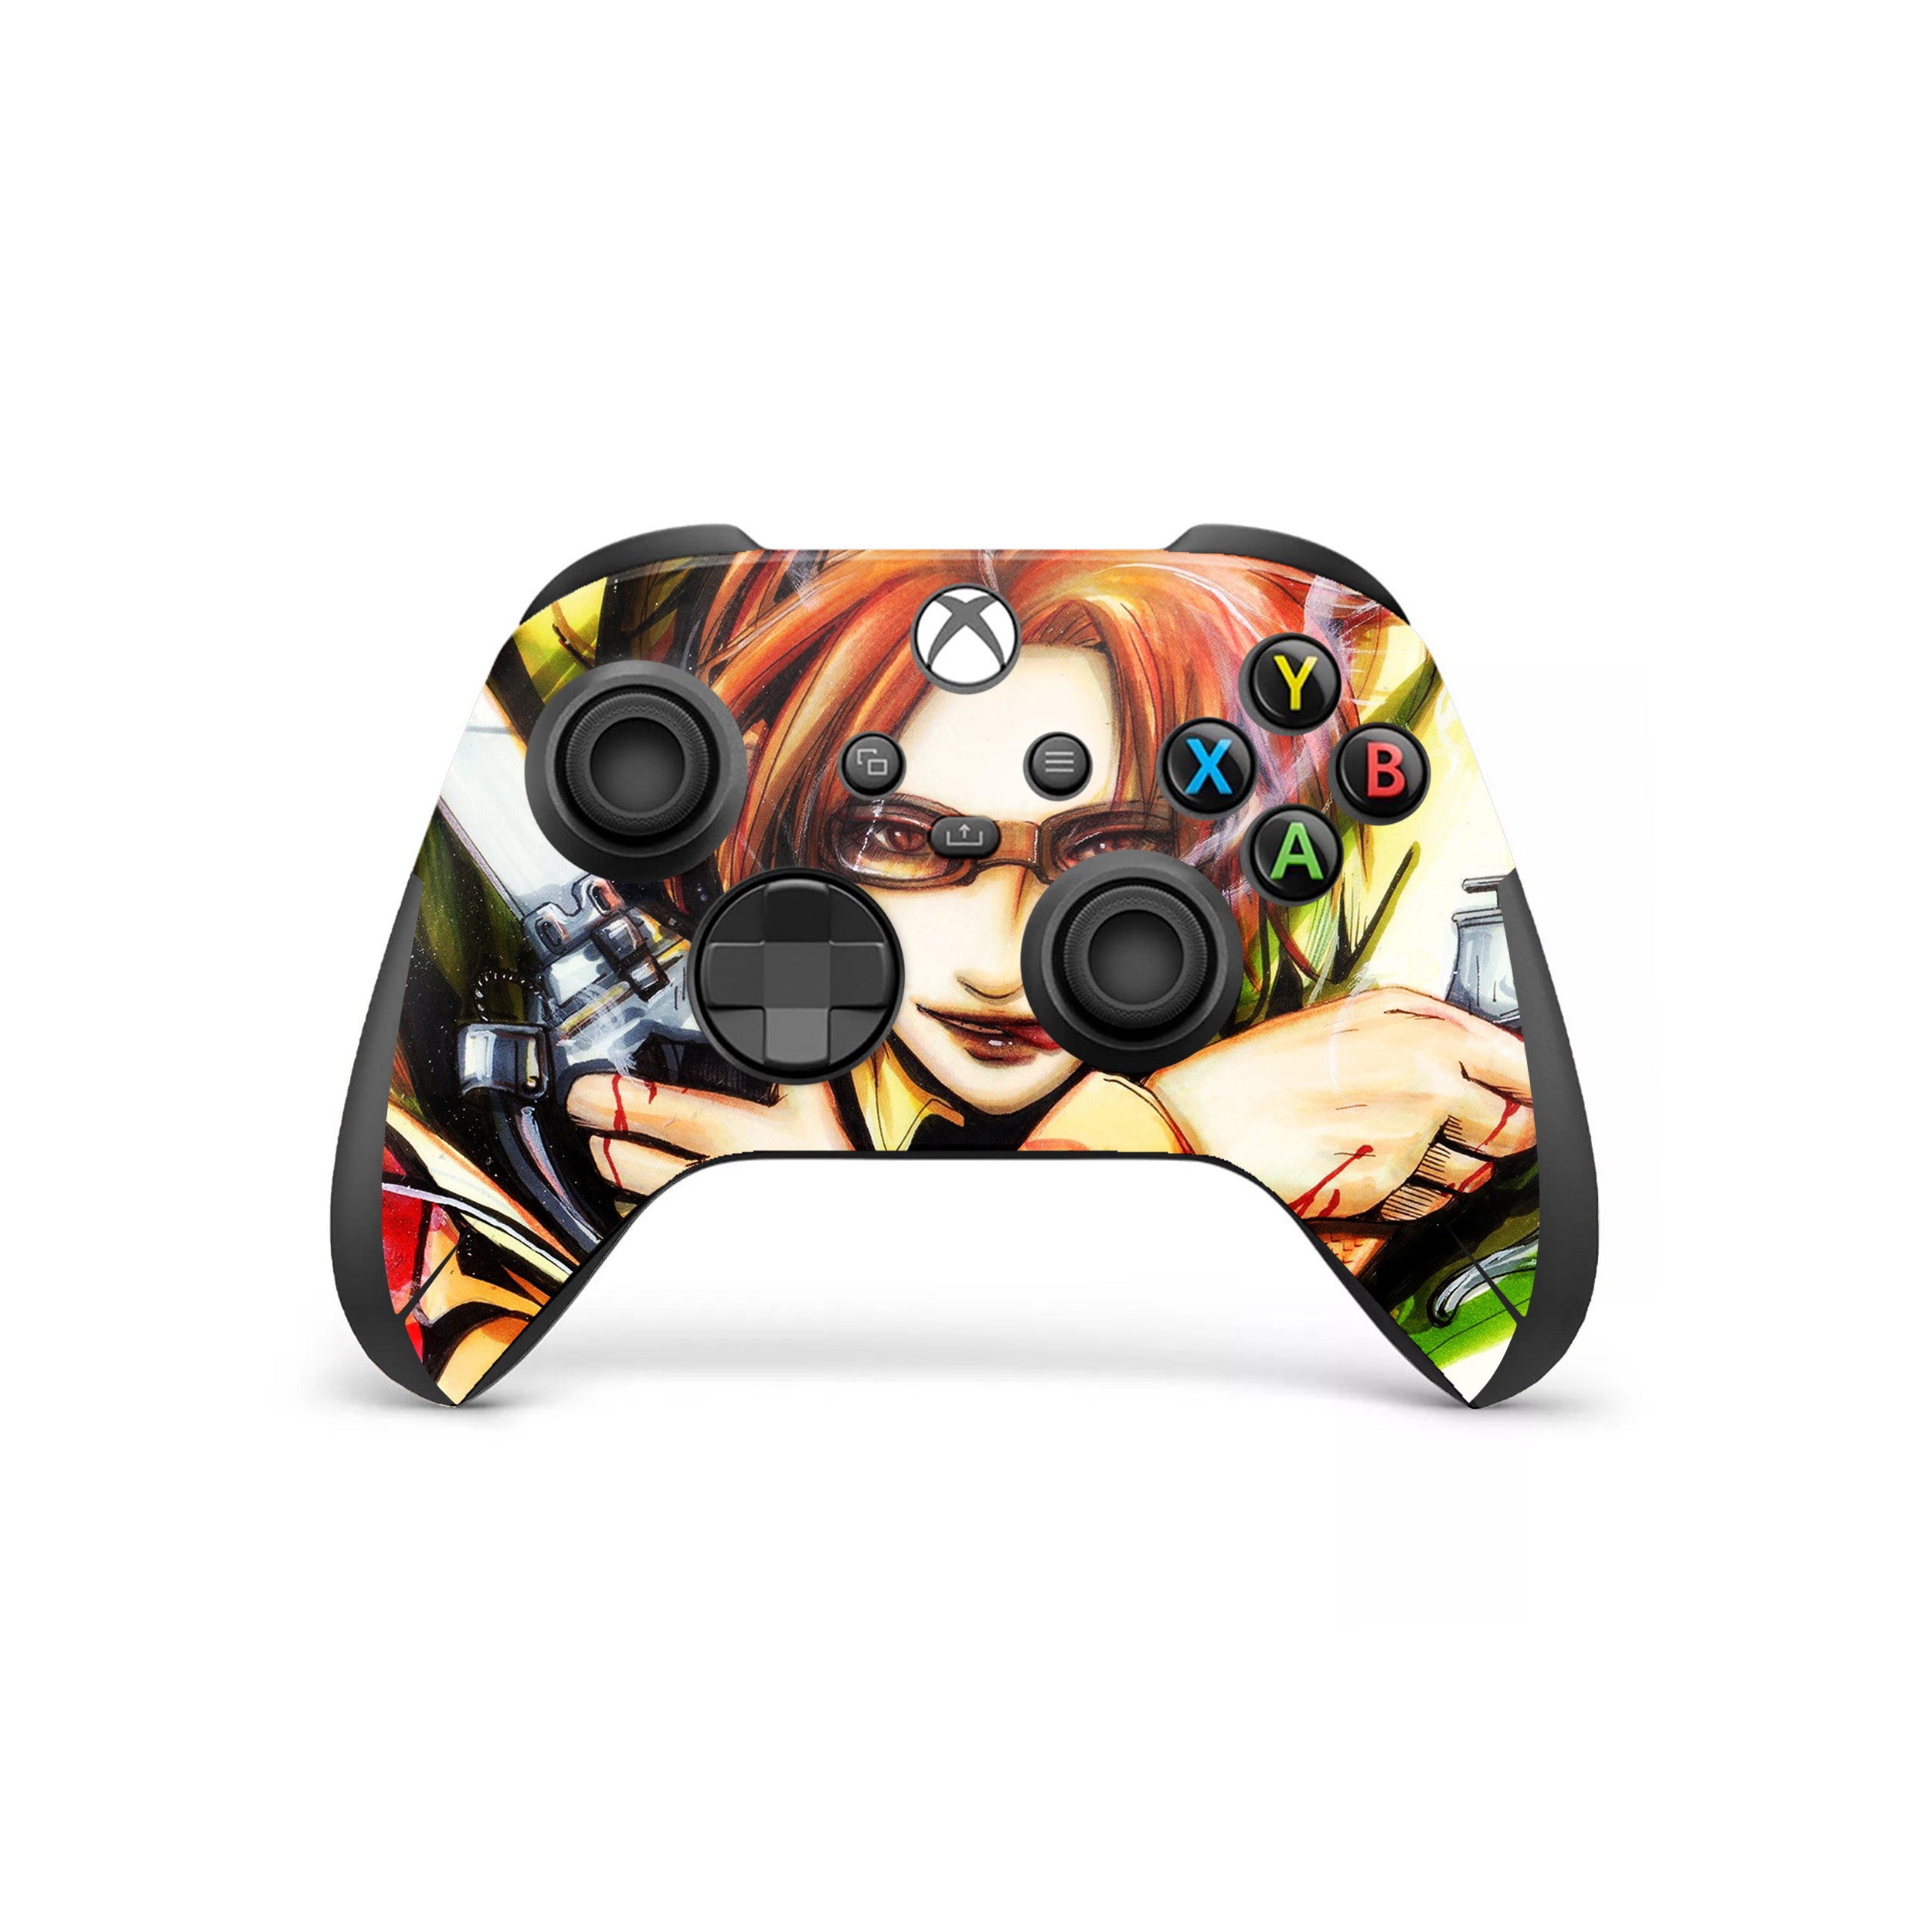 A video game skin featuring a Attack On Titan Hange Zoe design for the Xbox Wireless Controller.